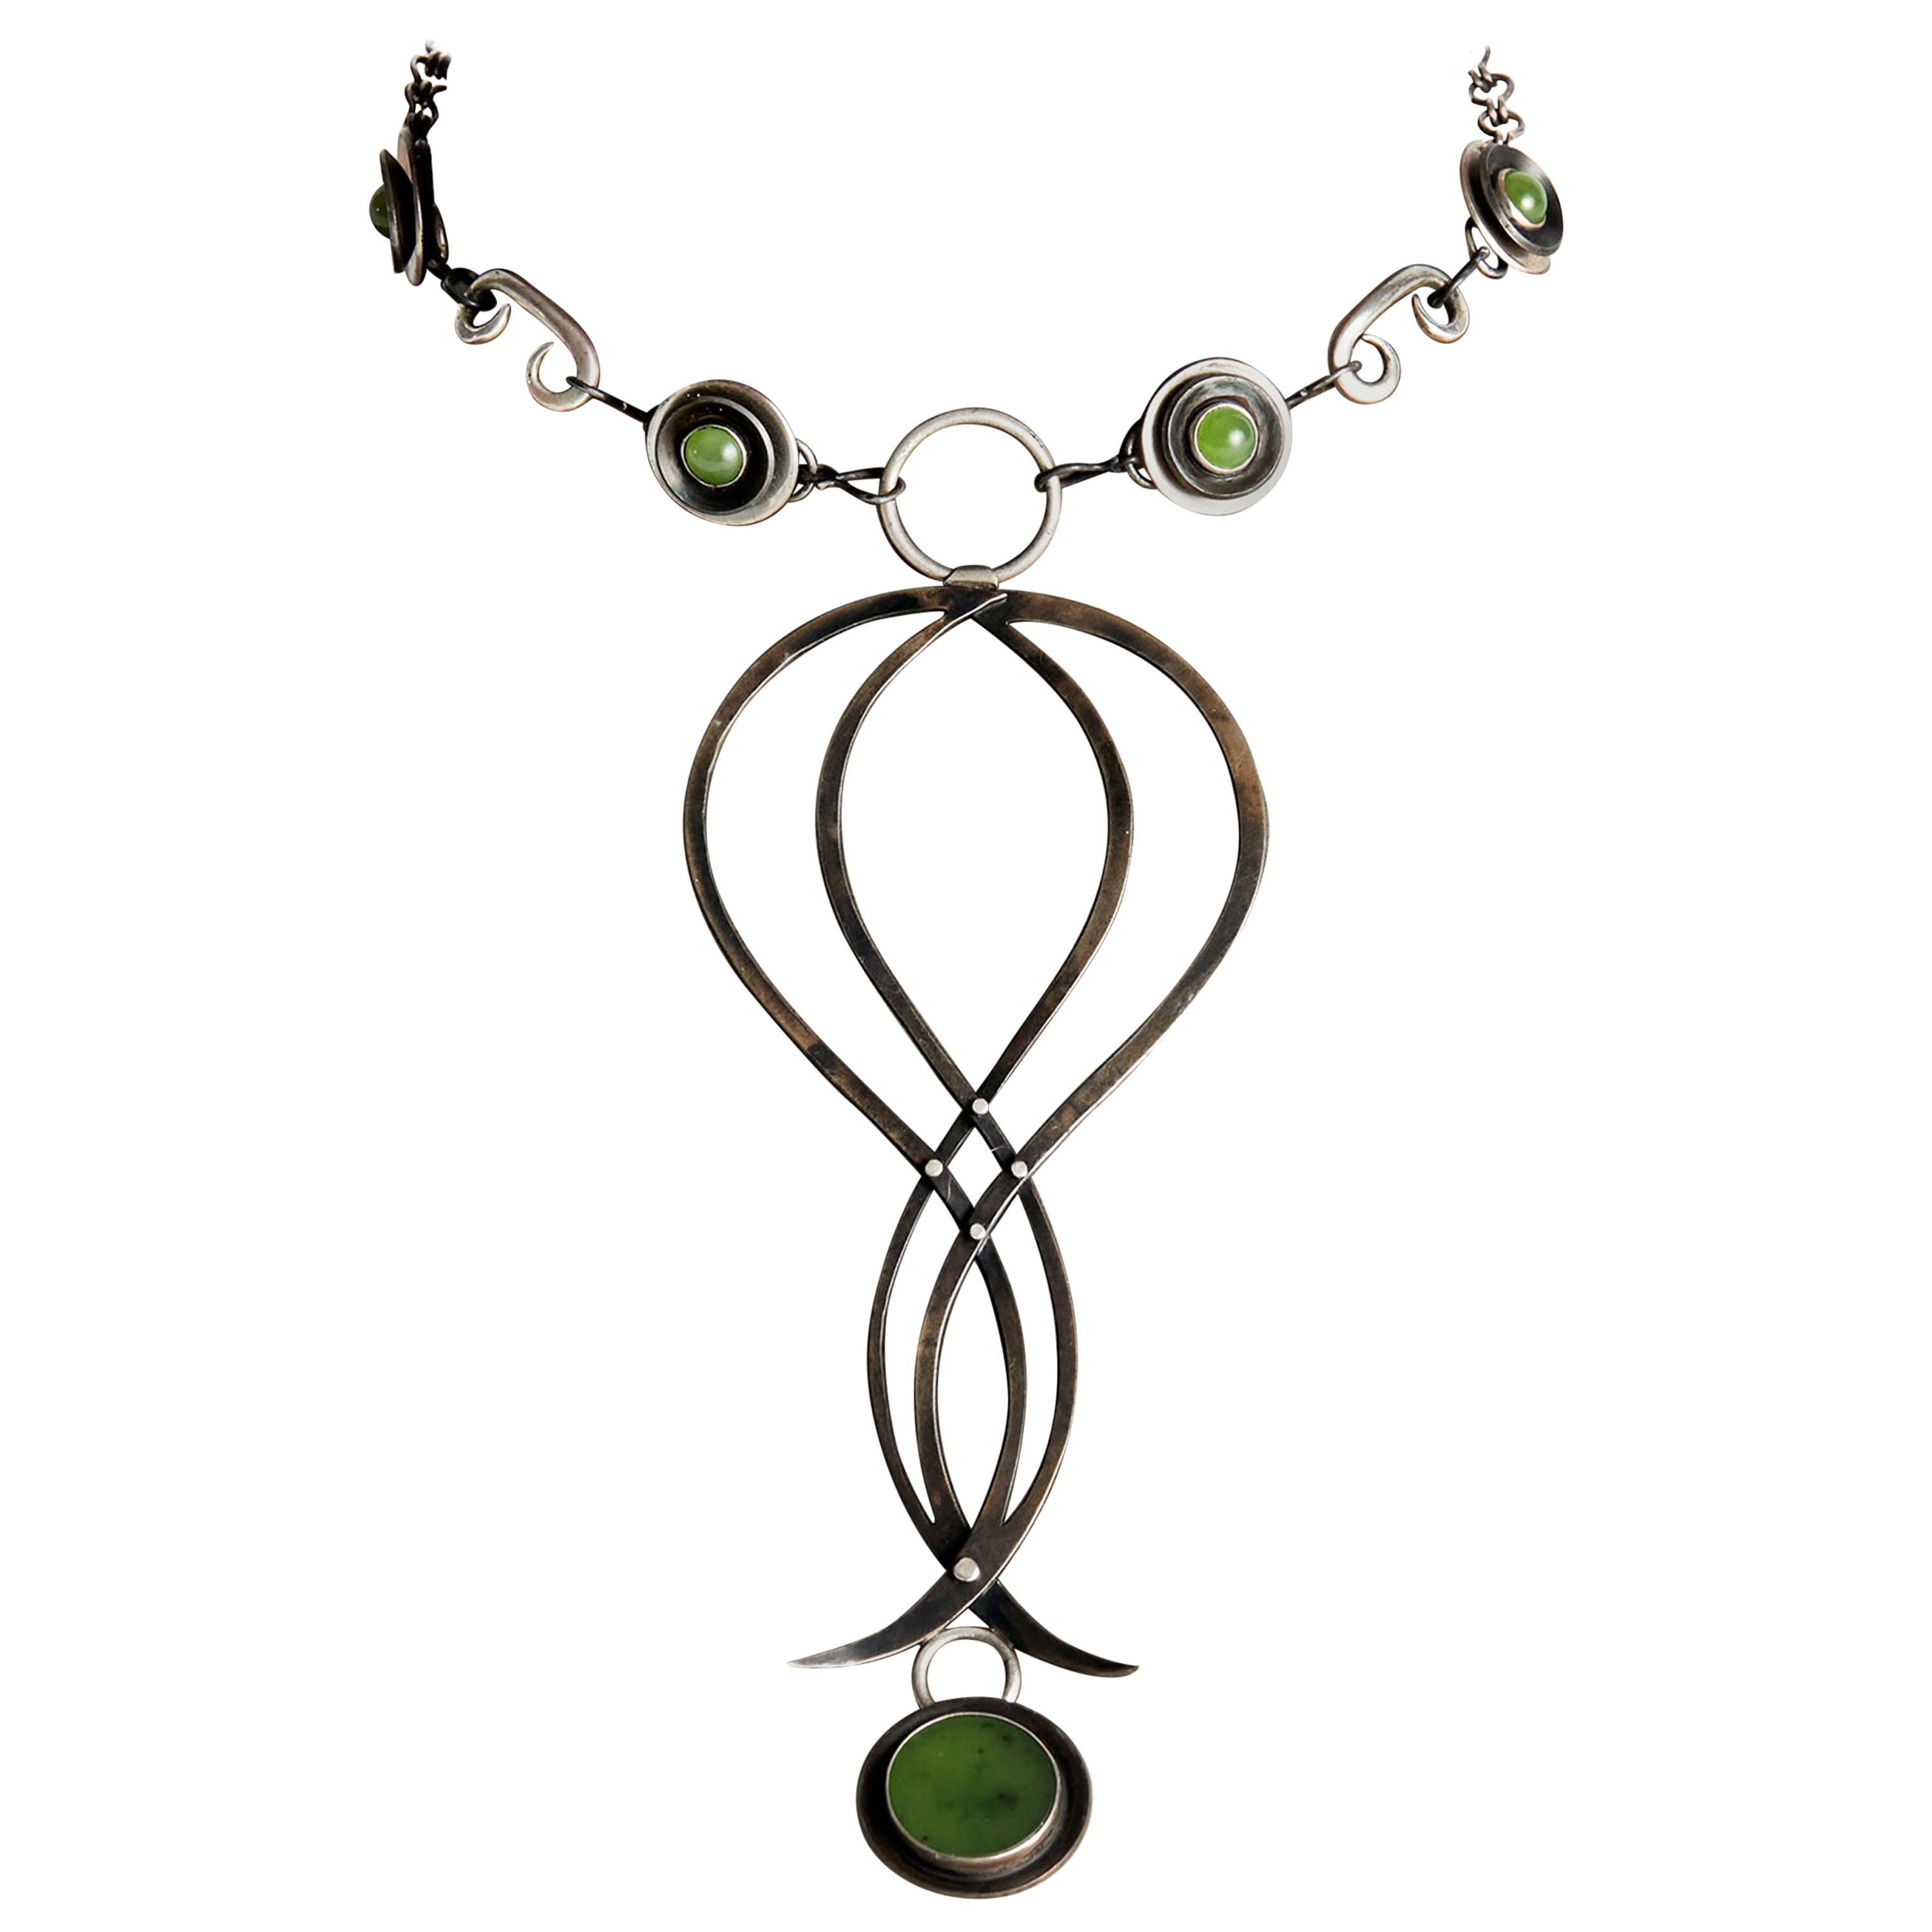 Audrey Werner, Iron, Sterling Silver & Jade Heart Necklace, United States, 2016